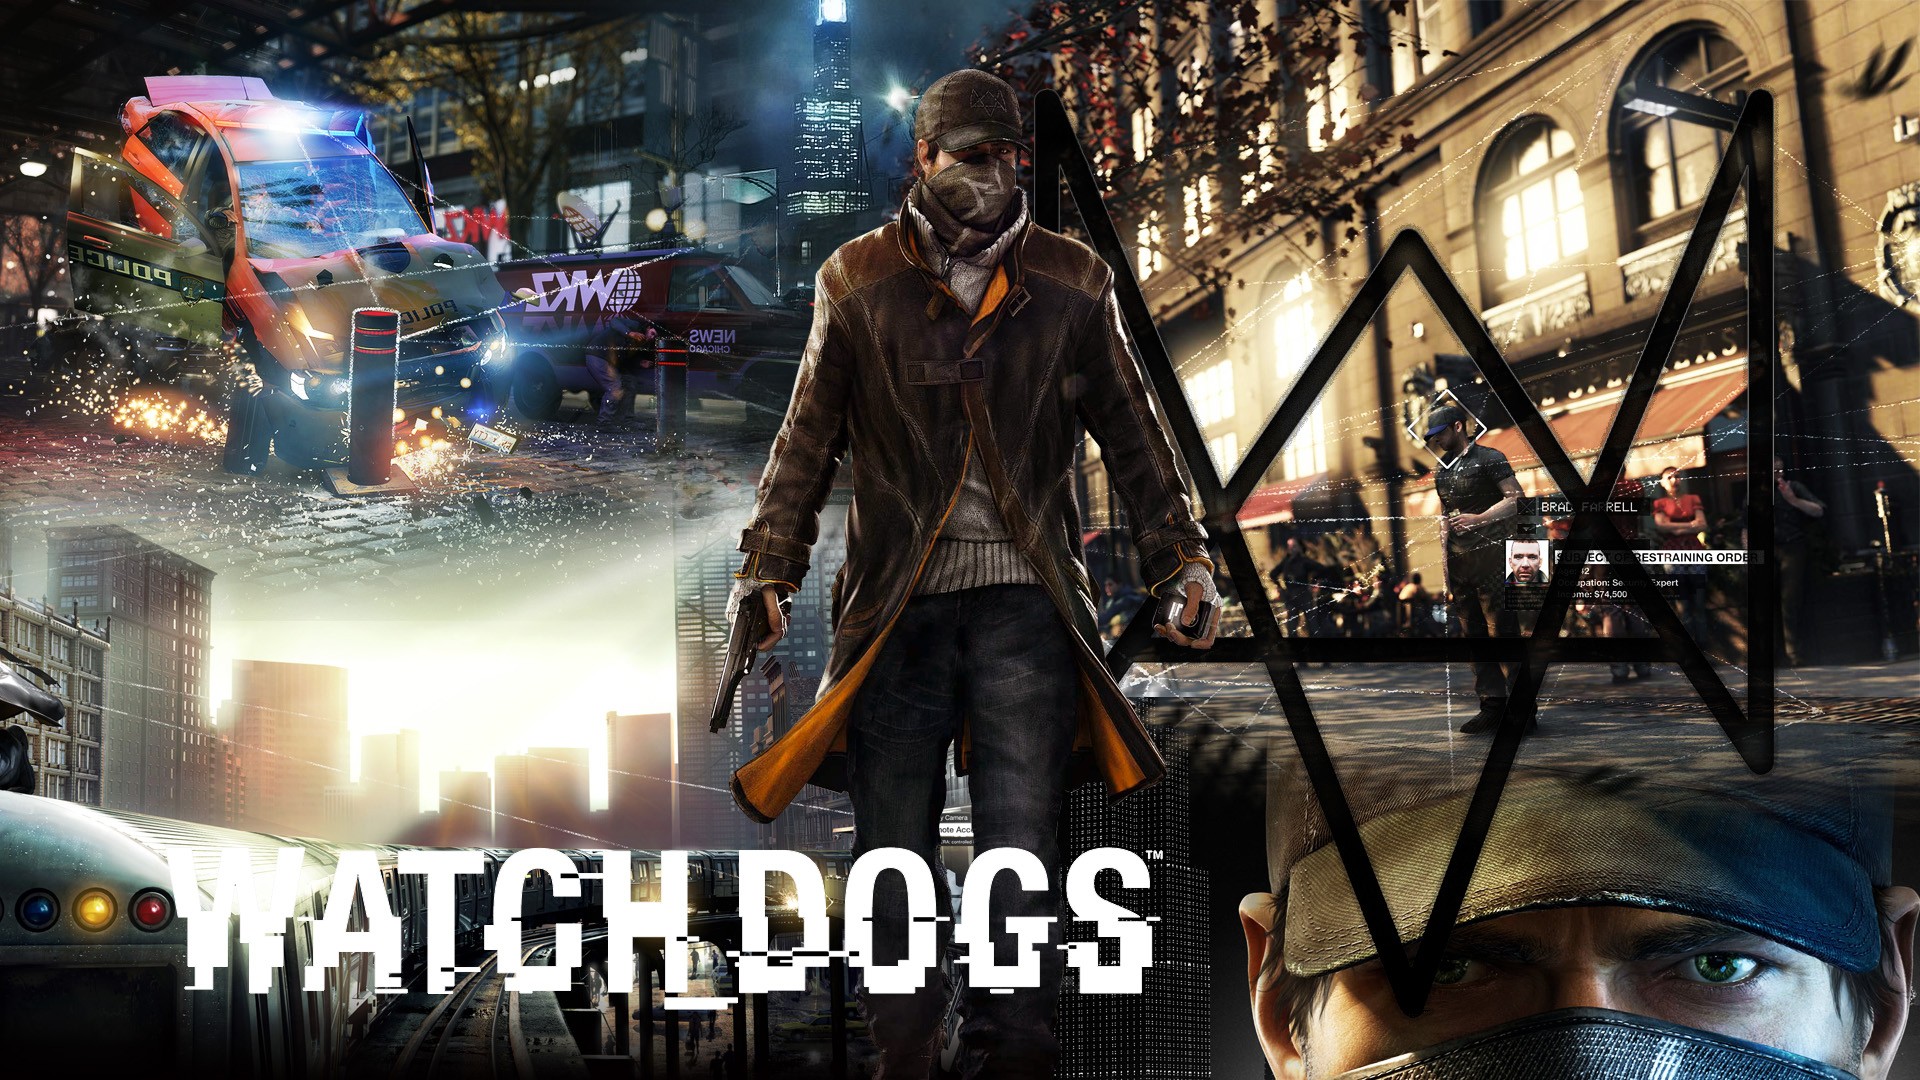 download watch dogs 2 for dualcore pc